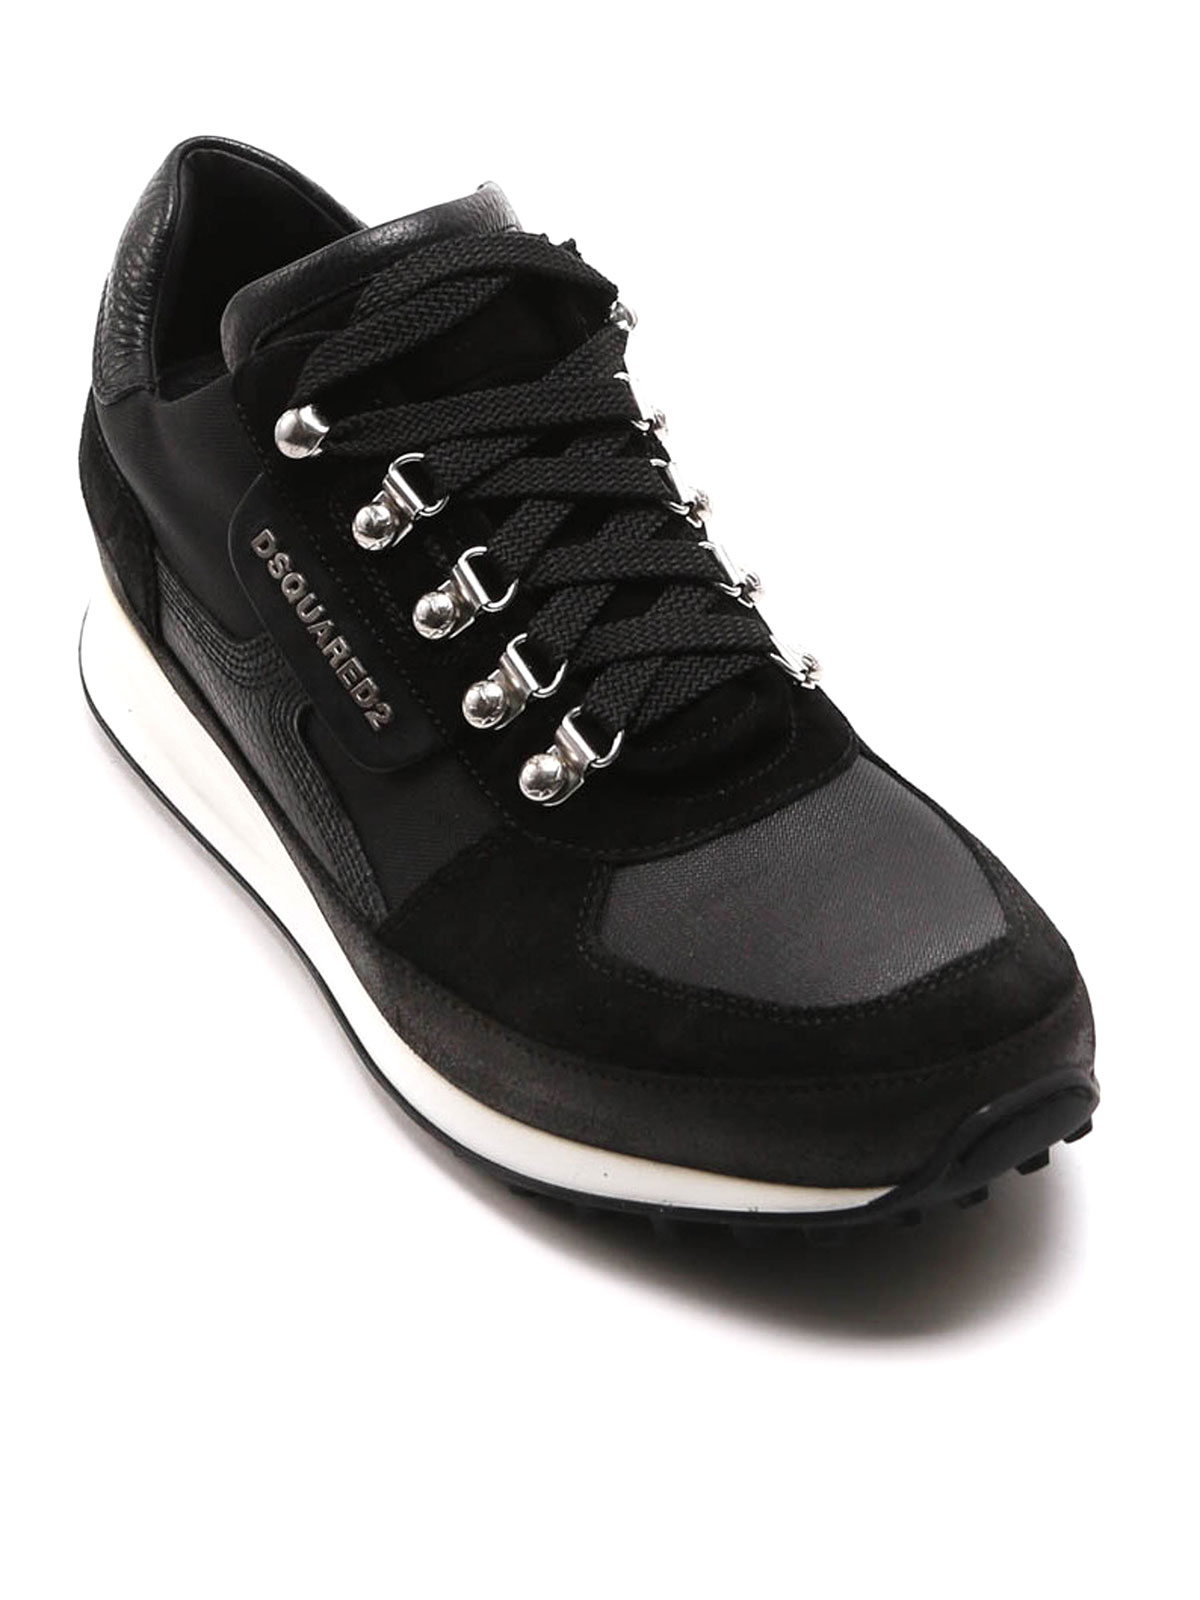 dsquared2 hiking sneakers